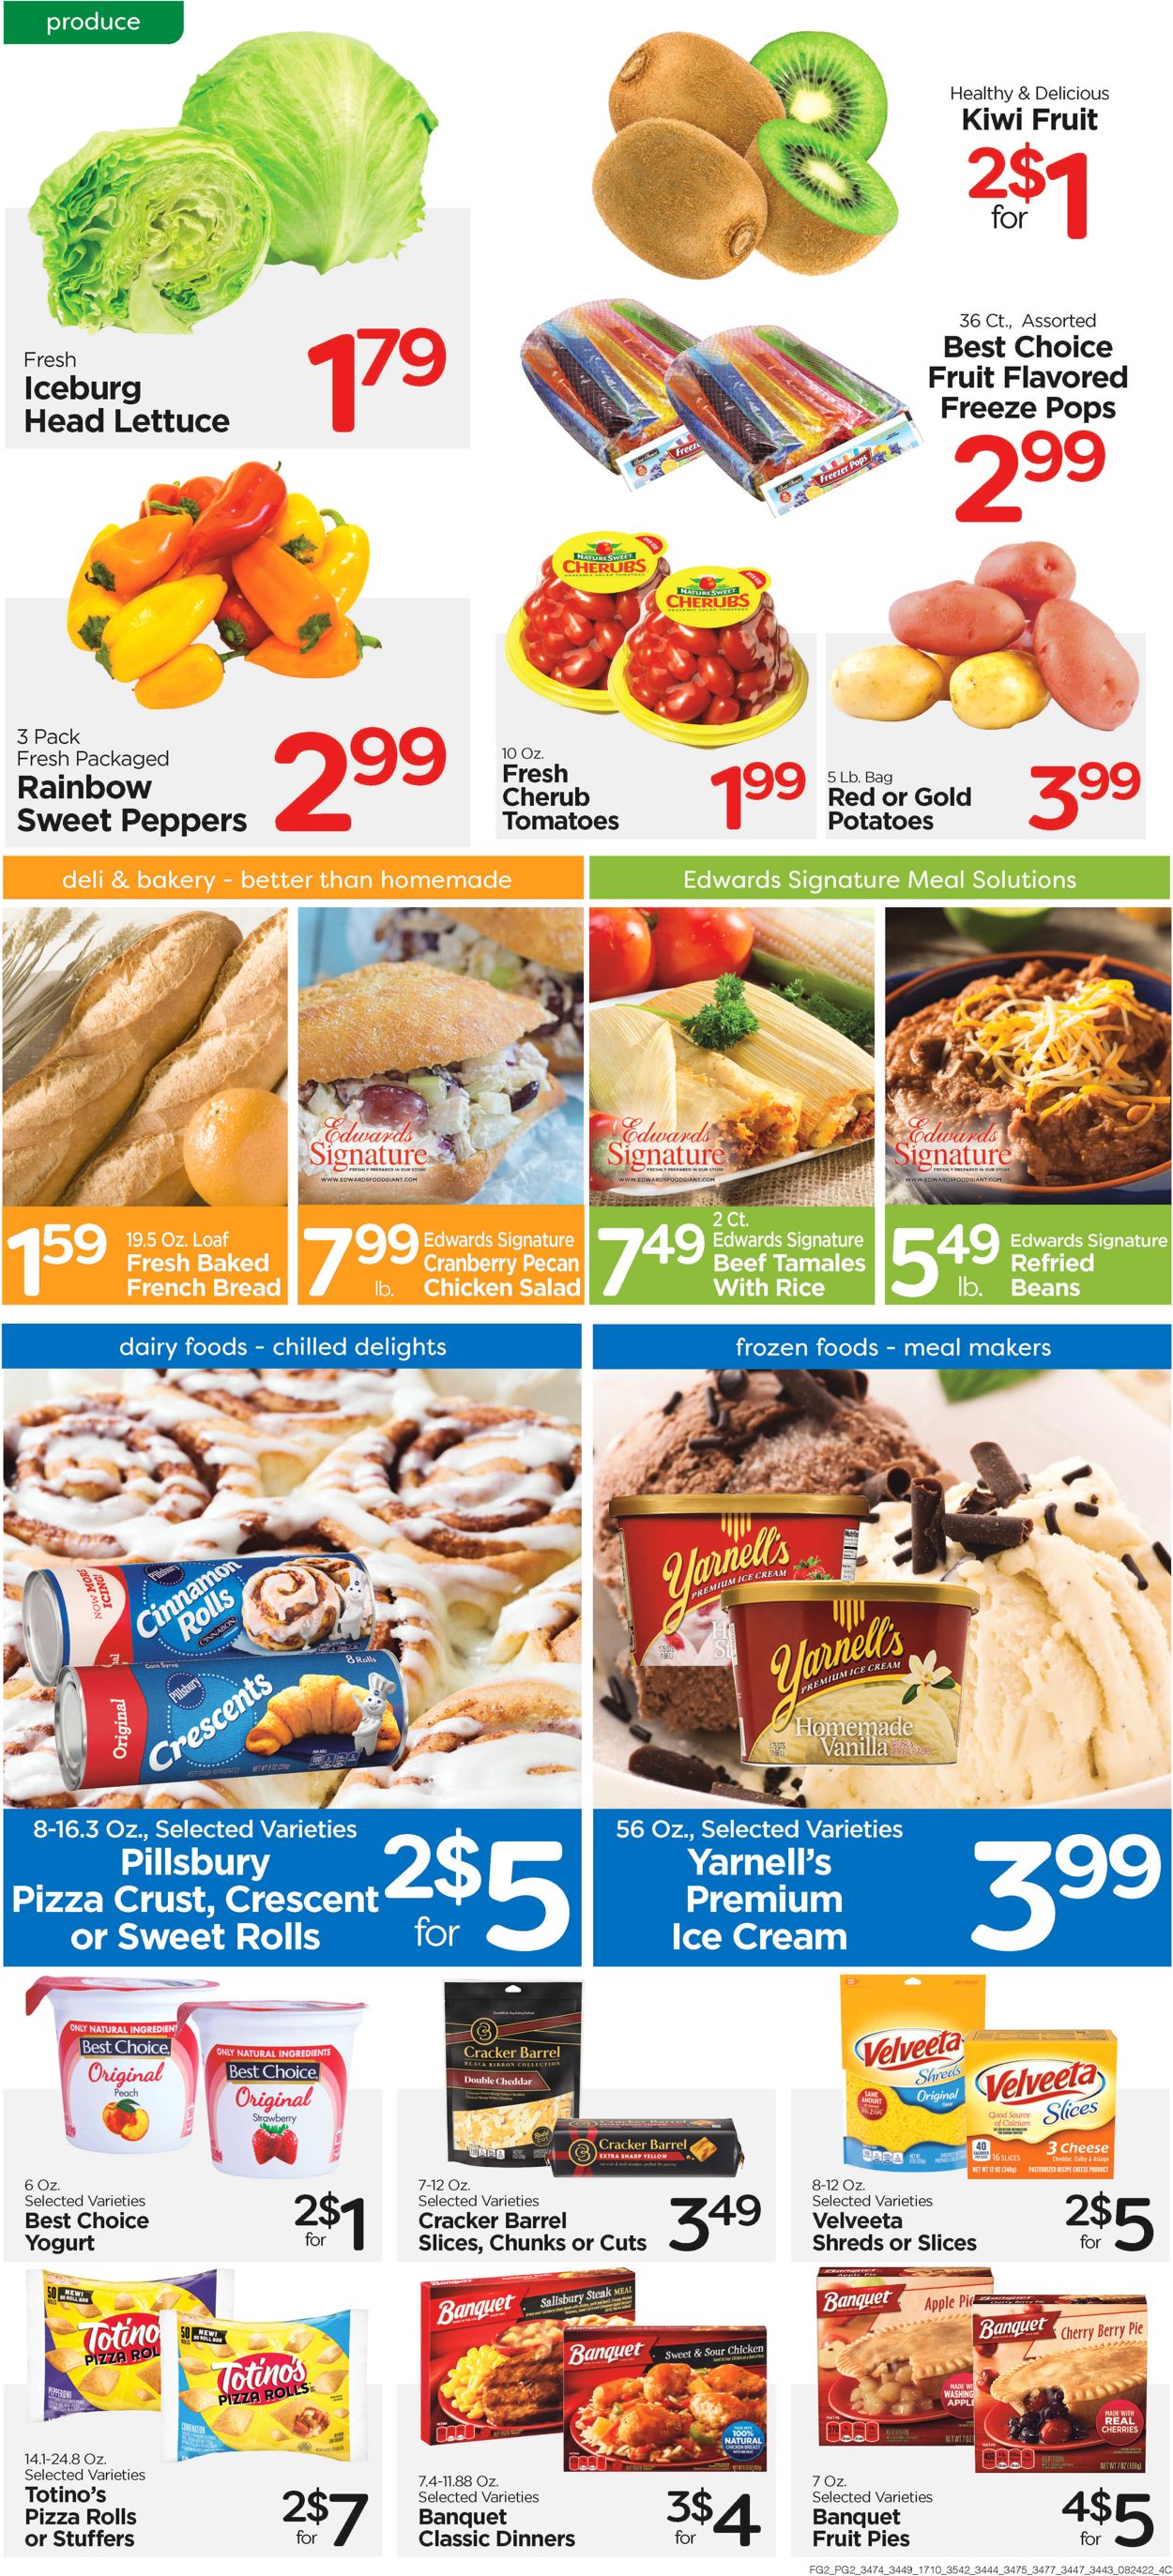 Catalogue Edwards Food Giant from 08/24/2022